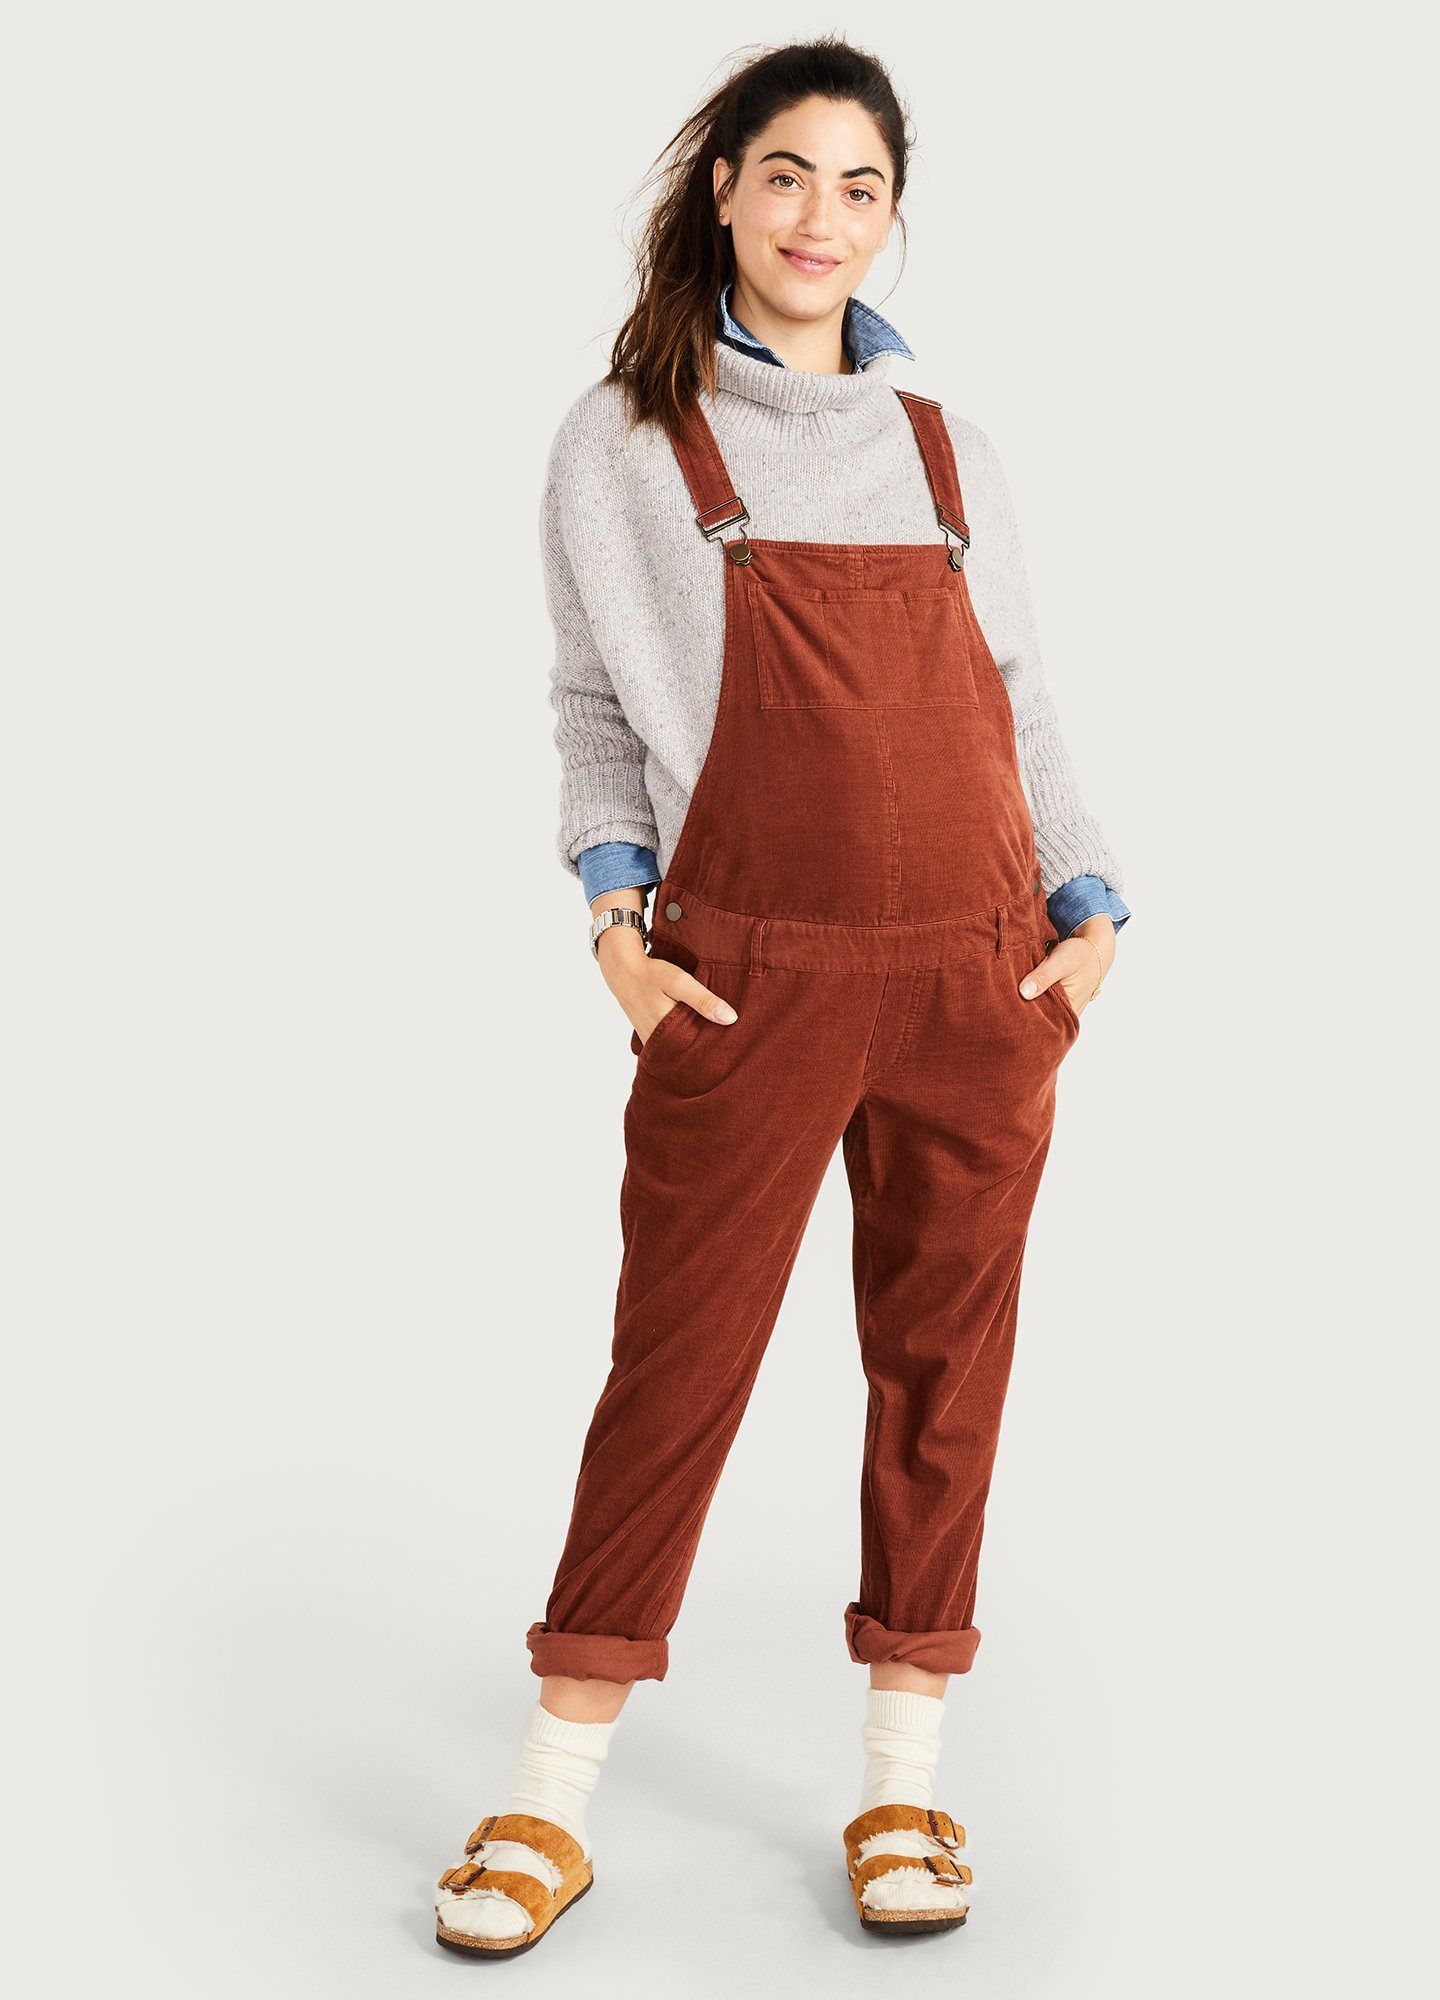 The Cord Overall